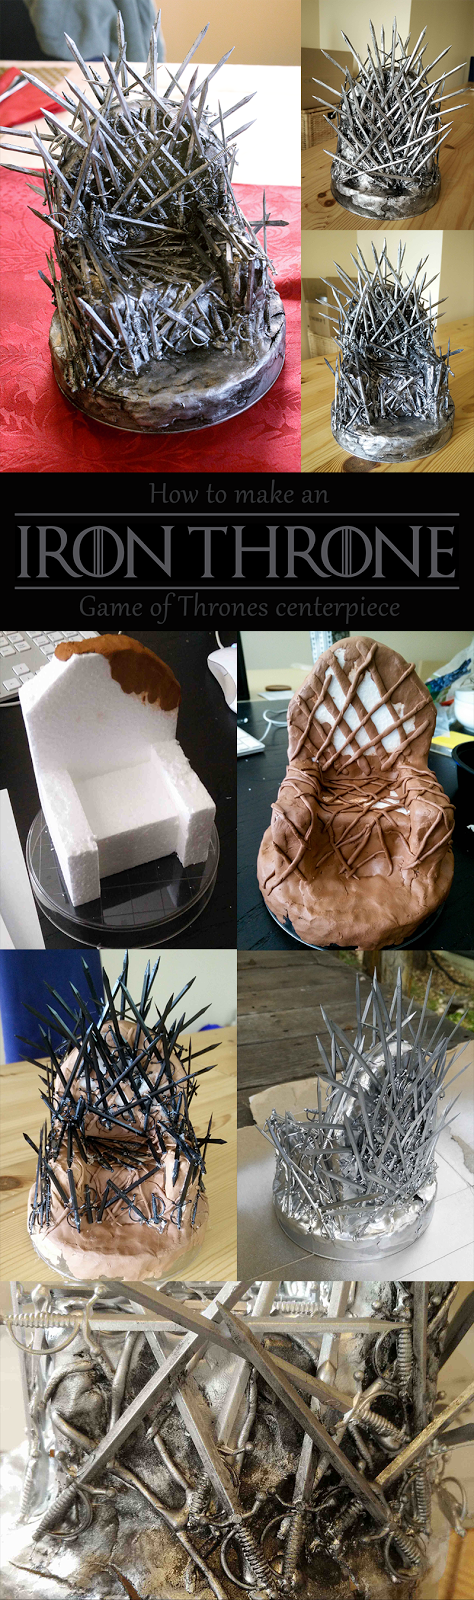 step-by-step instructions for crafting your own iron throne from cocktail swords